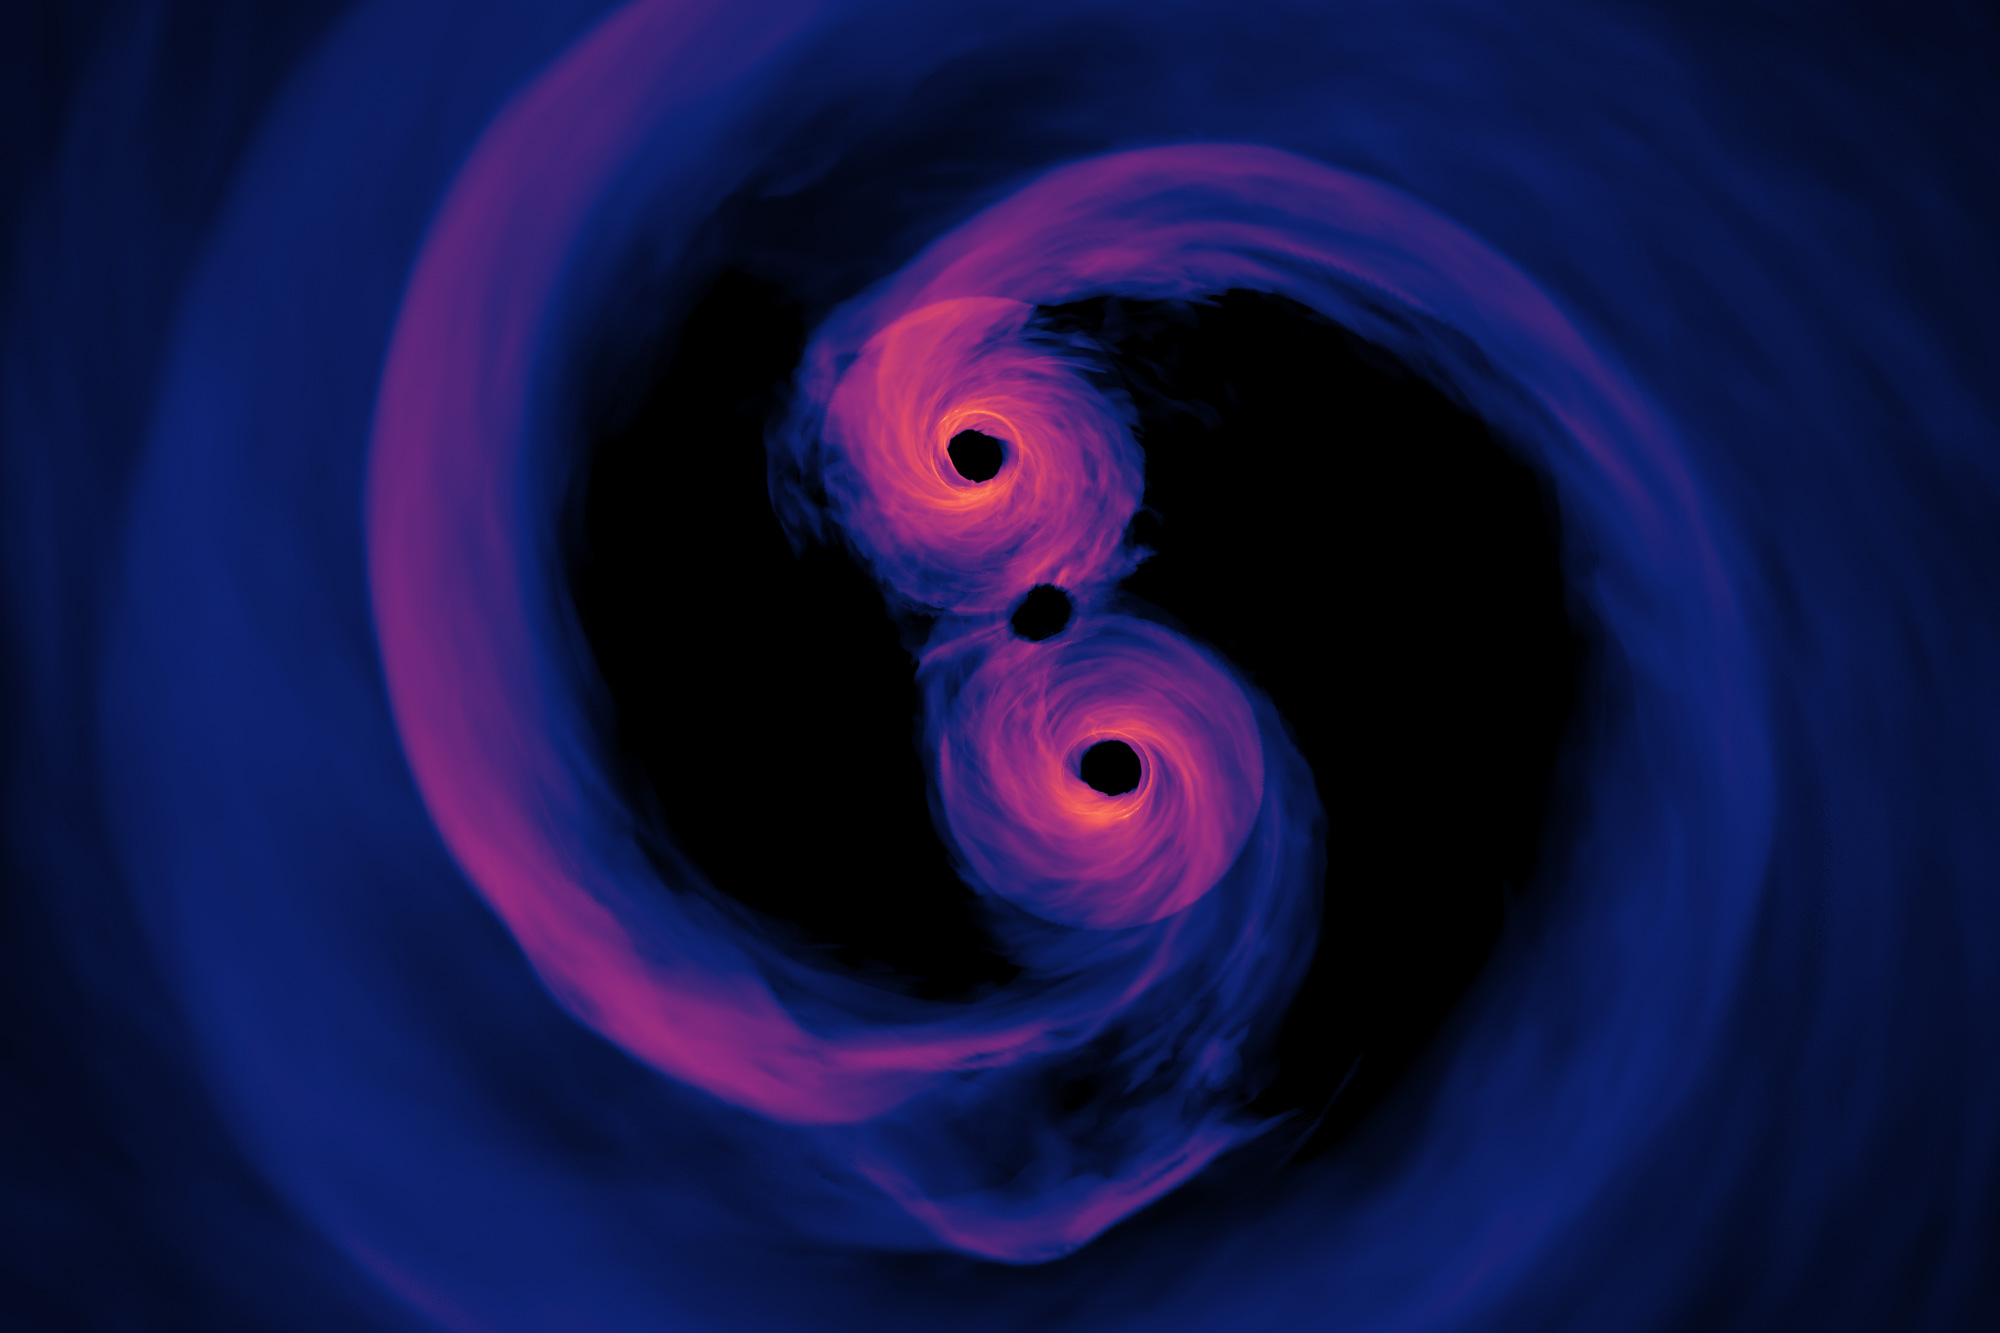 Study: Without more data, a black hole’s origins can be “spun” in any direction